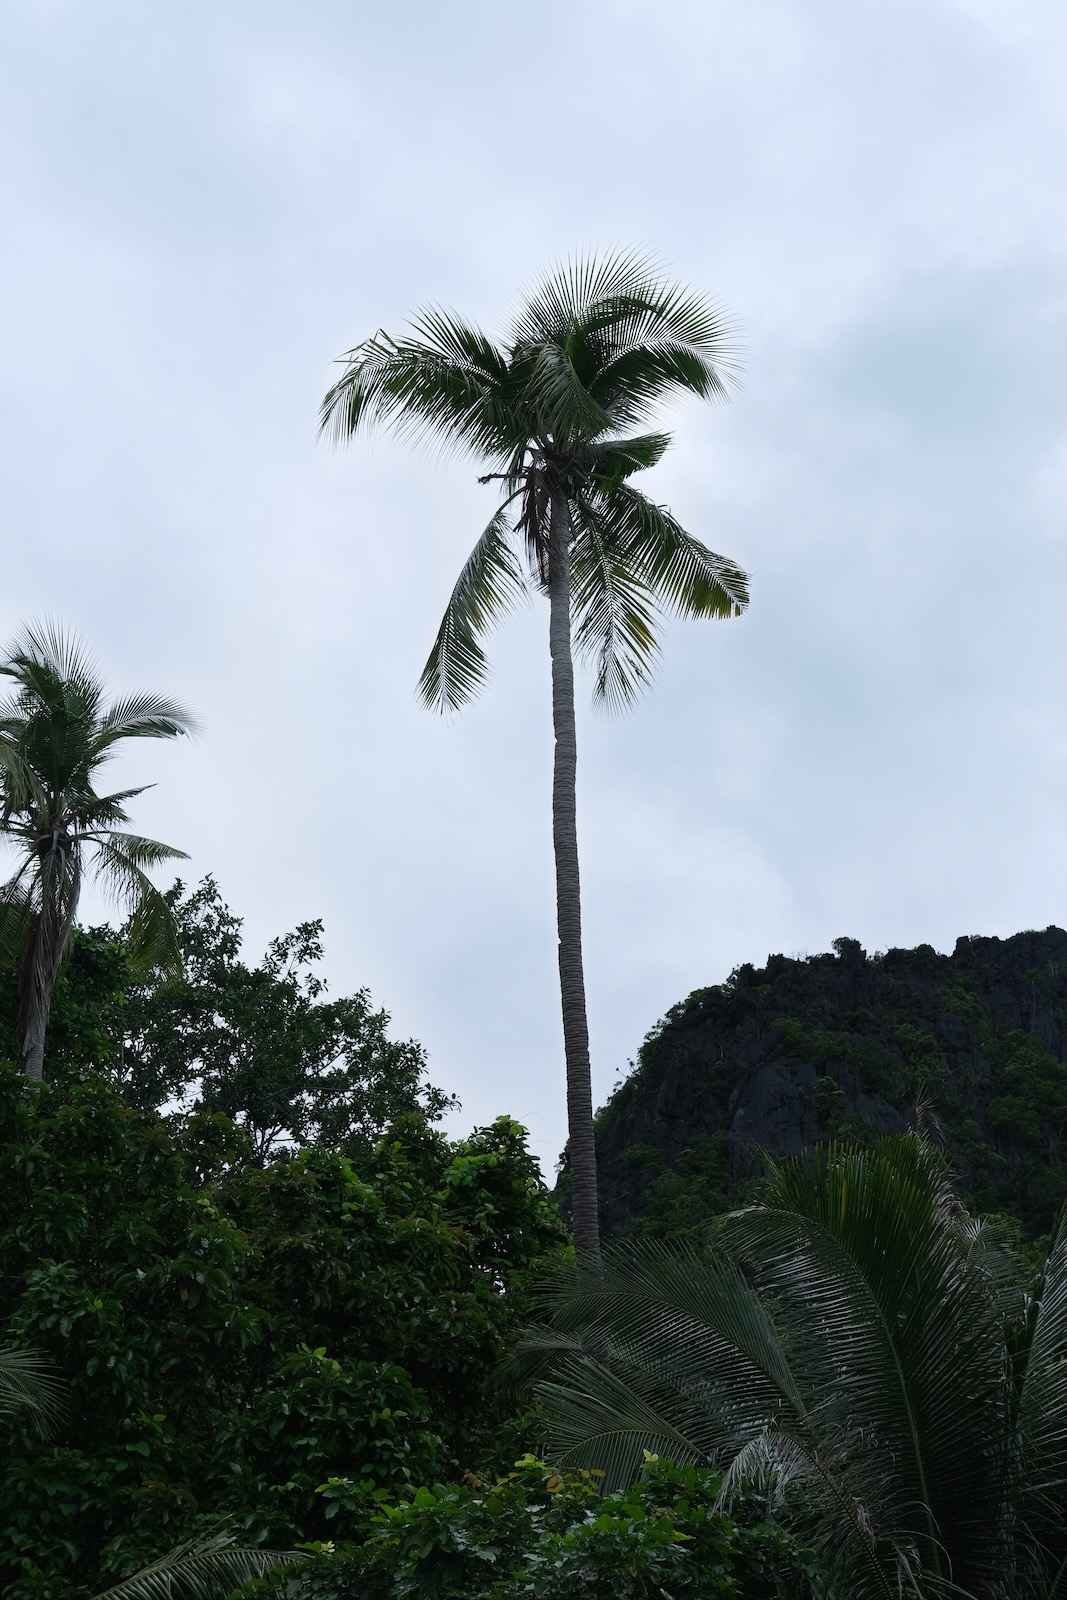 A coconut tree rising into the sky with a hillside in the background.